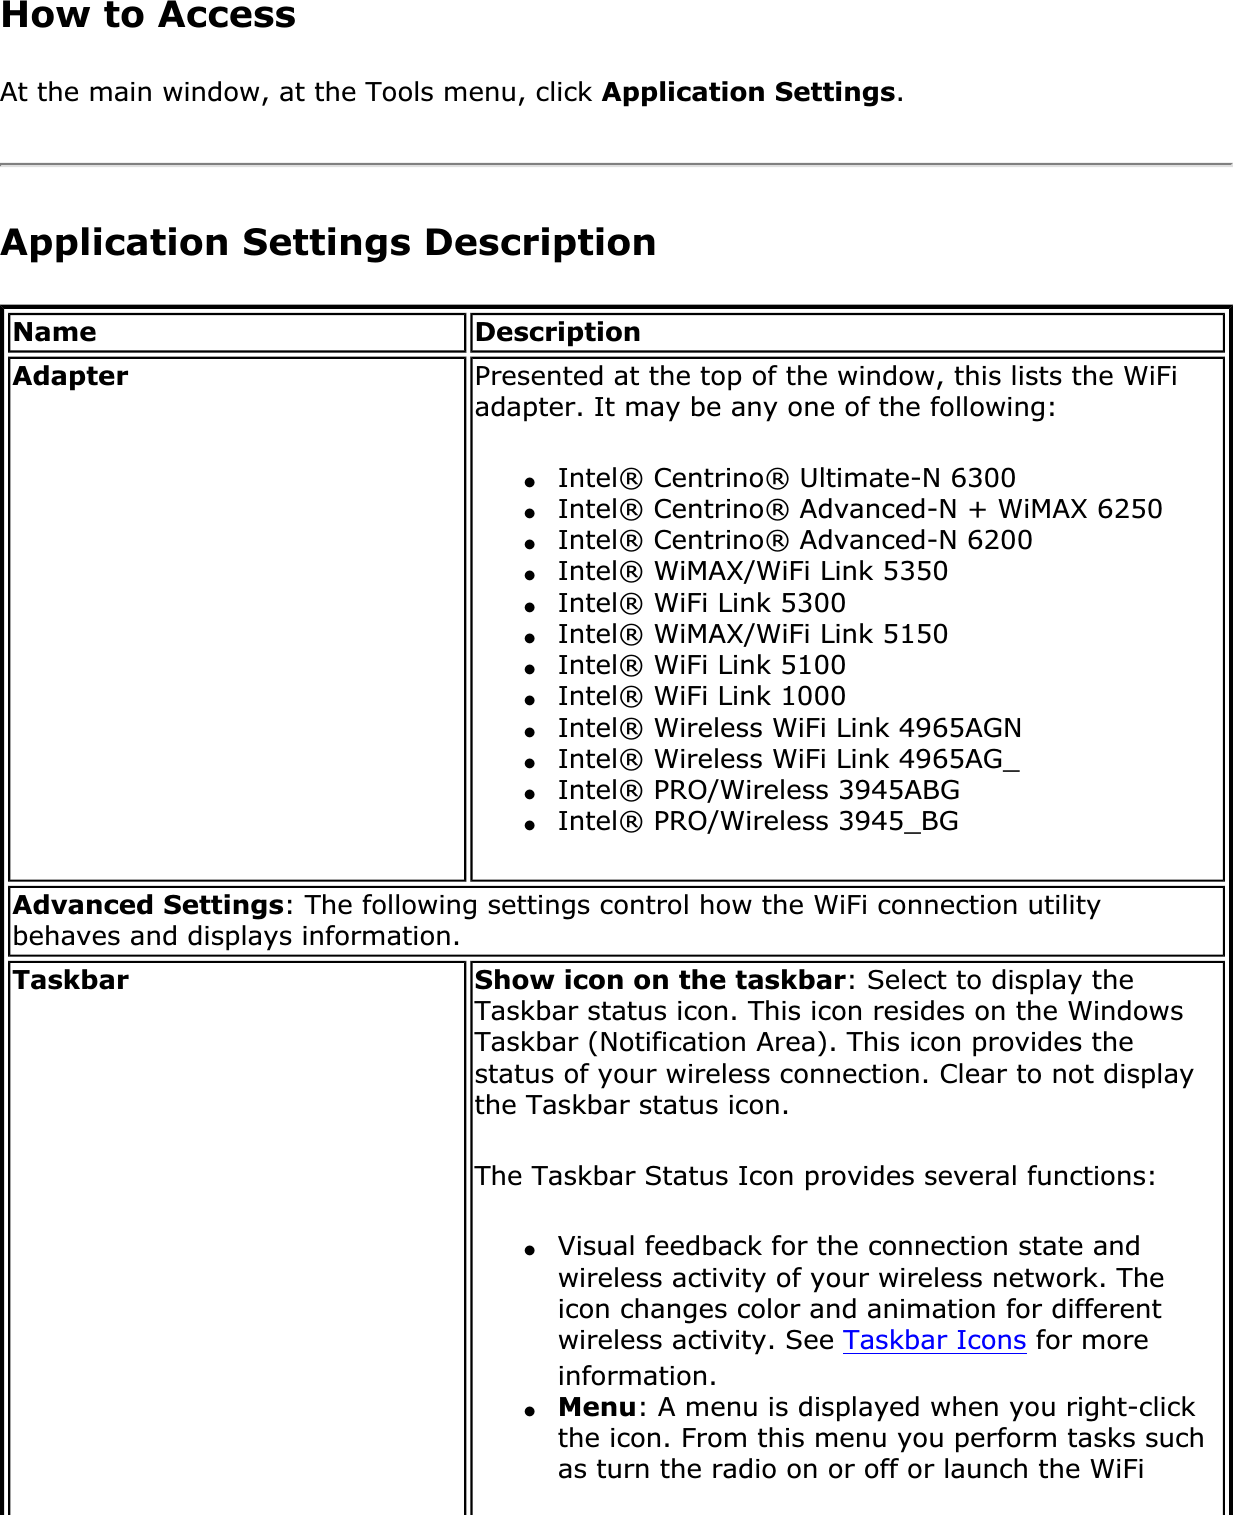 How to Access At the main window, at the Tools menu, click Application Settings.Application Settings DescriptionName DescriptionAdapter Presented at the top of the window, this lists the WiFi adapter. It may be any one of the following:●Intel® Centrino® Ultimate-N 6300●Intel® Centrino® Advanced-N + WiMAX 6250●Intel® Centrino® Advanced-N 6200●Intel® WiMAX/WiFi Link 5350●Intel® WiFi Link 5300●Intel® WiMAX/WiFi Link 5150●Intel® WiFi Link 5100●Intel® WiFi Link 1000●Intel® Wireless WiFi Link 4965AGN●Intel® Wireless WiFi Link 4965AG_●Intel® PRO/Wireless 3945ABG●Intel® PRO/Wireless 3945_BGAdvanced Settings: The following settings control how the WiFi connection utility behaves and displays information.Taskbar Show icon on the taskbar: Select to display the Taskbar status icon. This icon resides on the Windows Taskbar (Notification Area). This icon provides the status of your wireless connection. Clear to not display the Taskbar status icon.The Taskbar Status Icon provides several functions:●Visual feedback for the connection state and wireless activity of your wireless network. The icon changes color and animation for different wireless activity. See Taskbar Icons for more information.●Menu: A menu is displayed when you right-click the icon. From this menu you perform tasks such as turn the radio on or off or launch the WiFi 